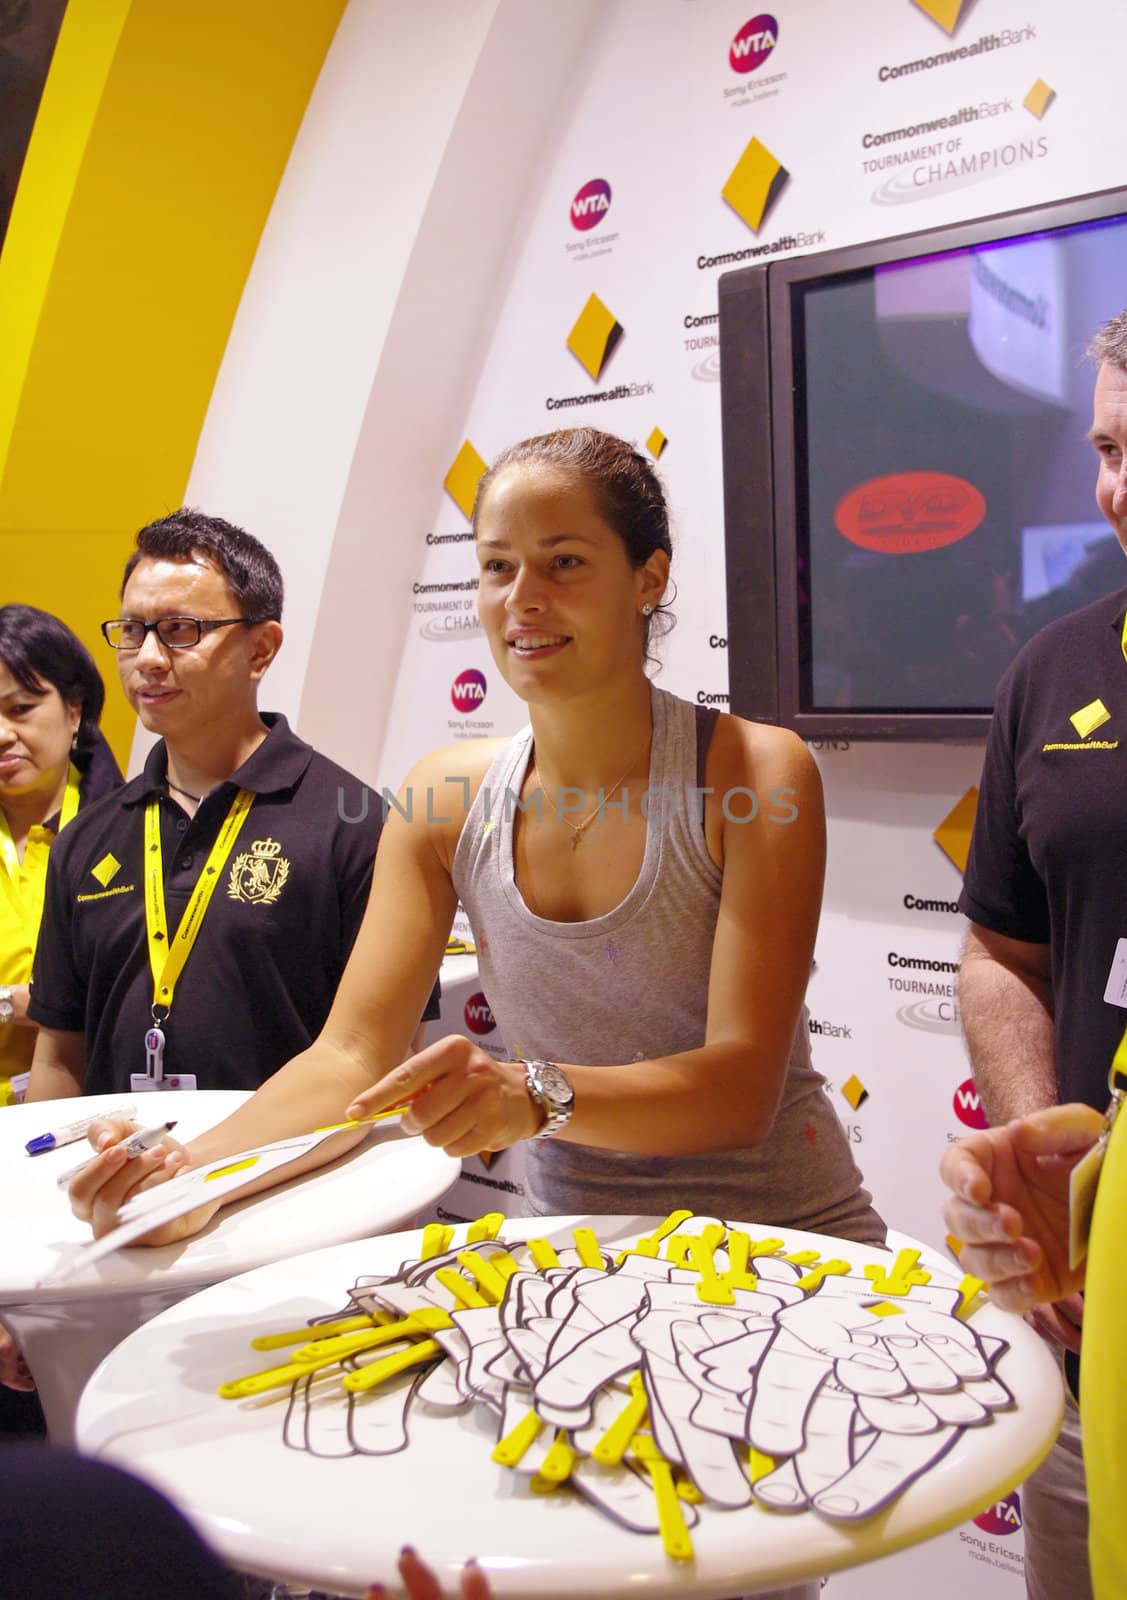 Ana Ivanovic autograph signing at the last WTA tennis tournament of 2010, Tournament of Champions, Nusa Dua, Bali, Indonesia. Ivanovic is the tournament winner. November 4, 2010.